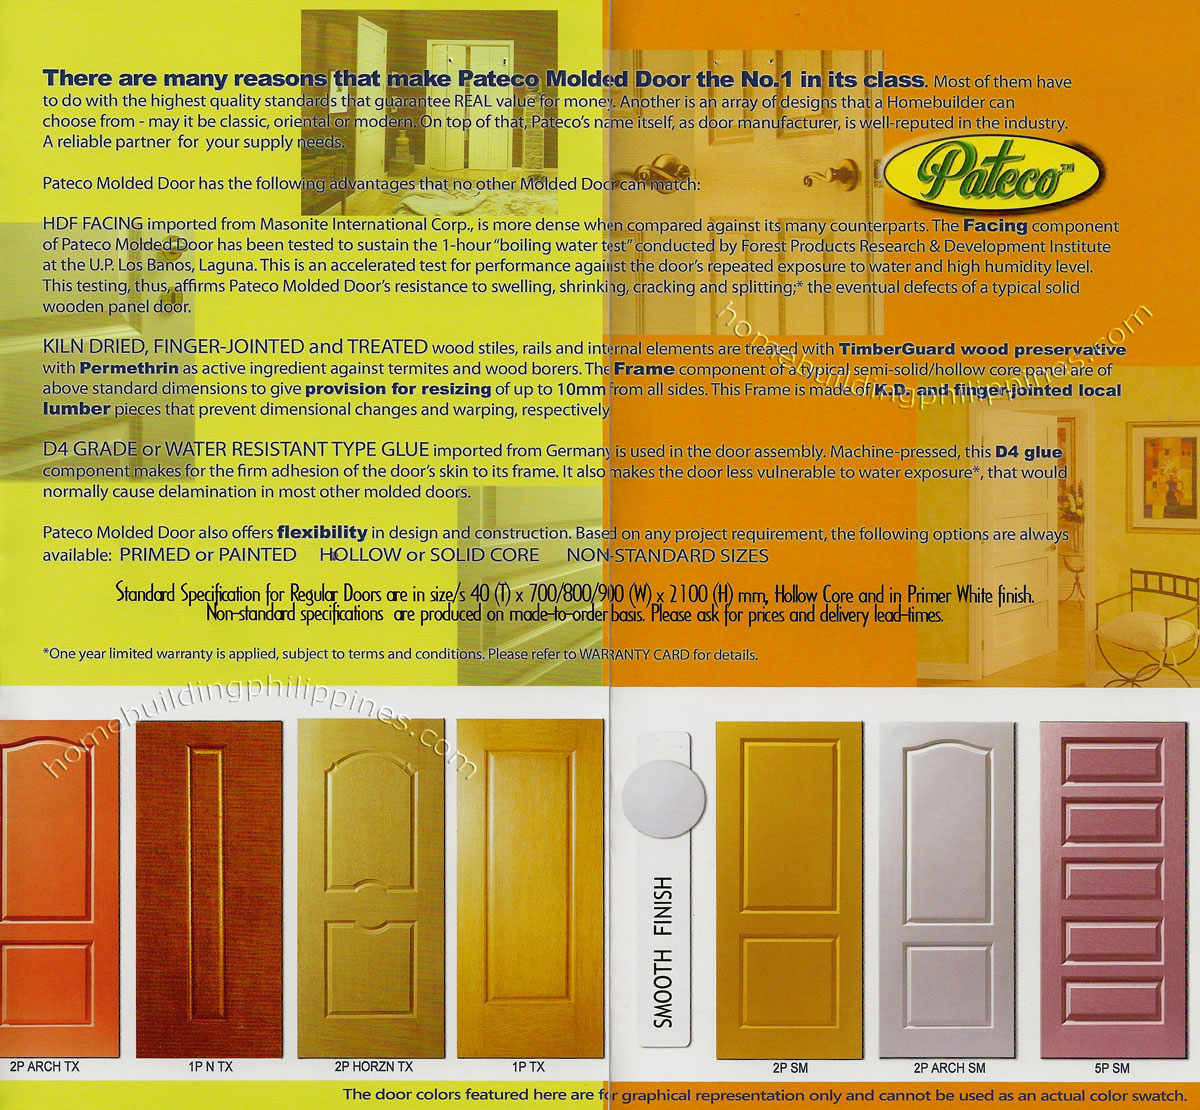 Pateco Molded Door Advantages, Specifications